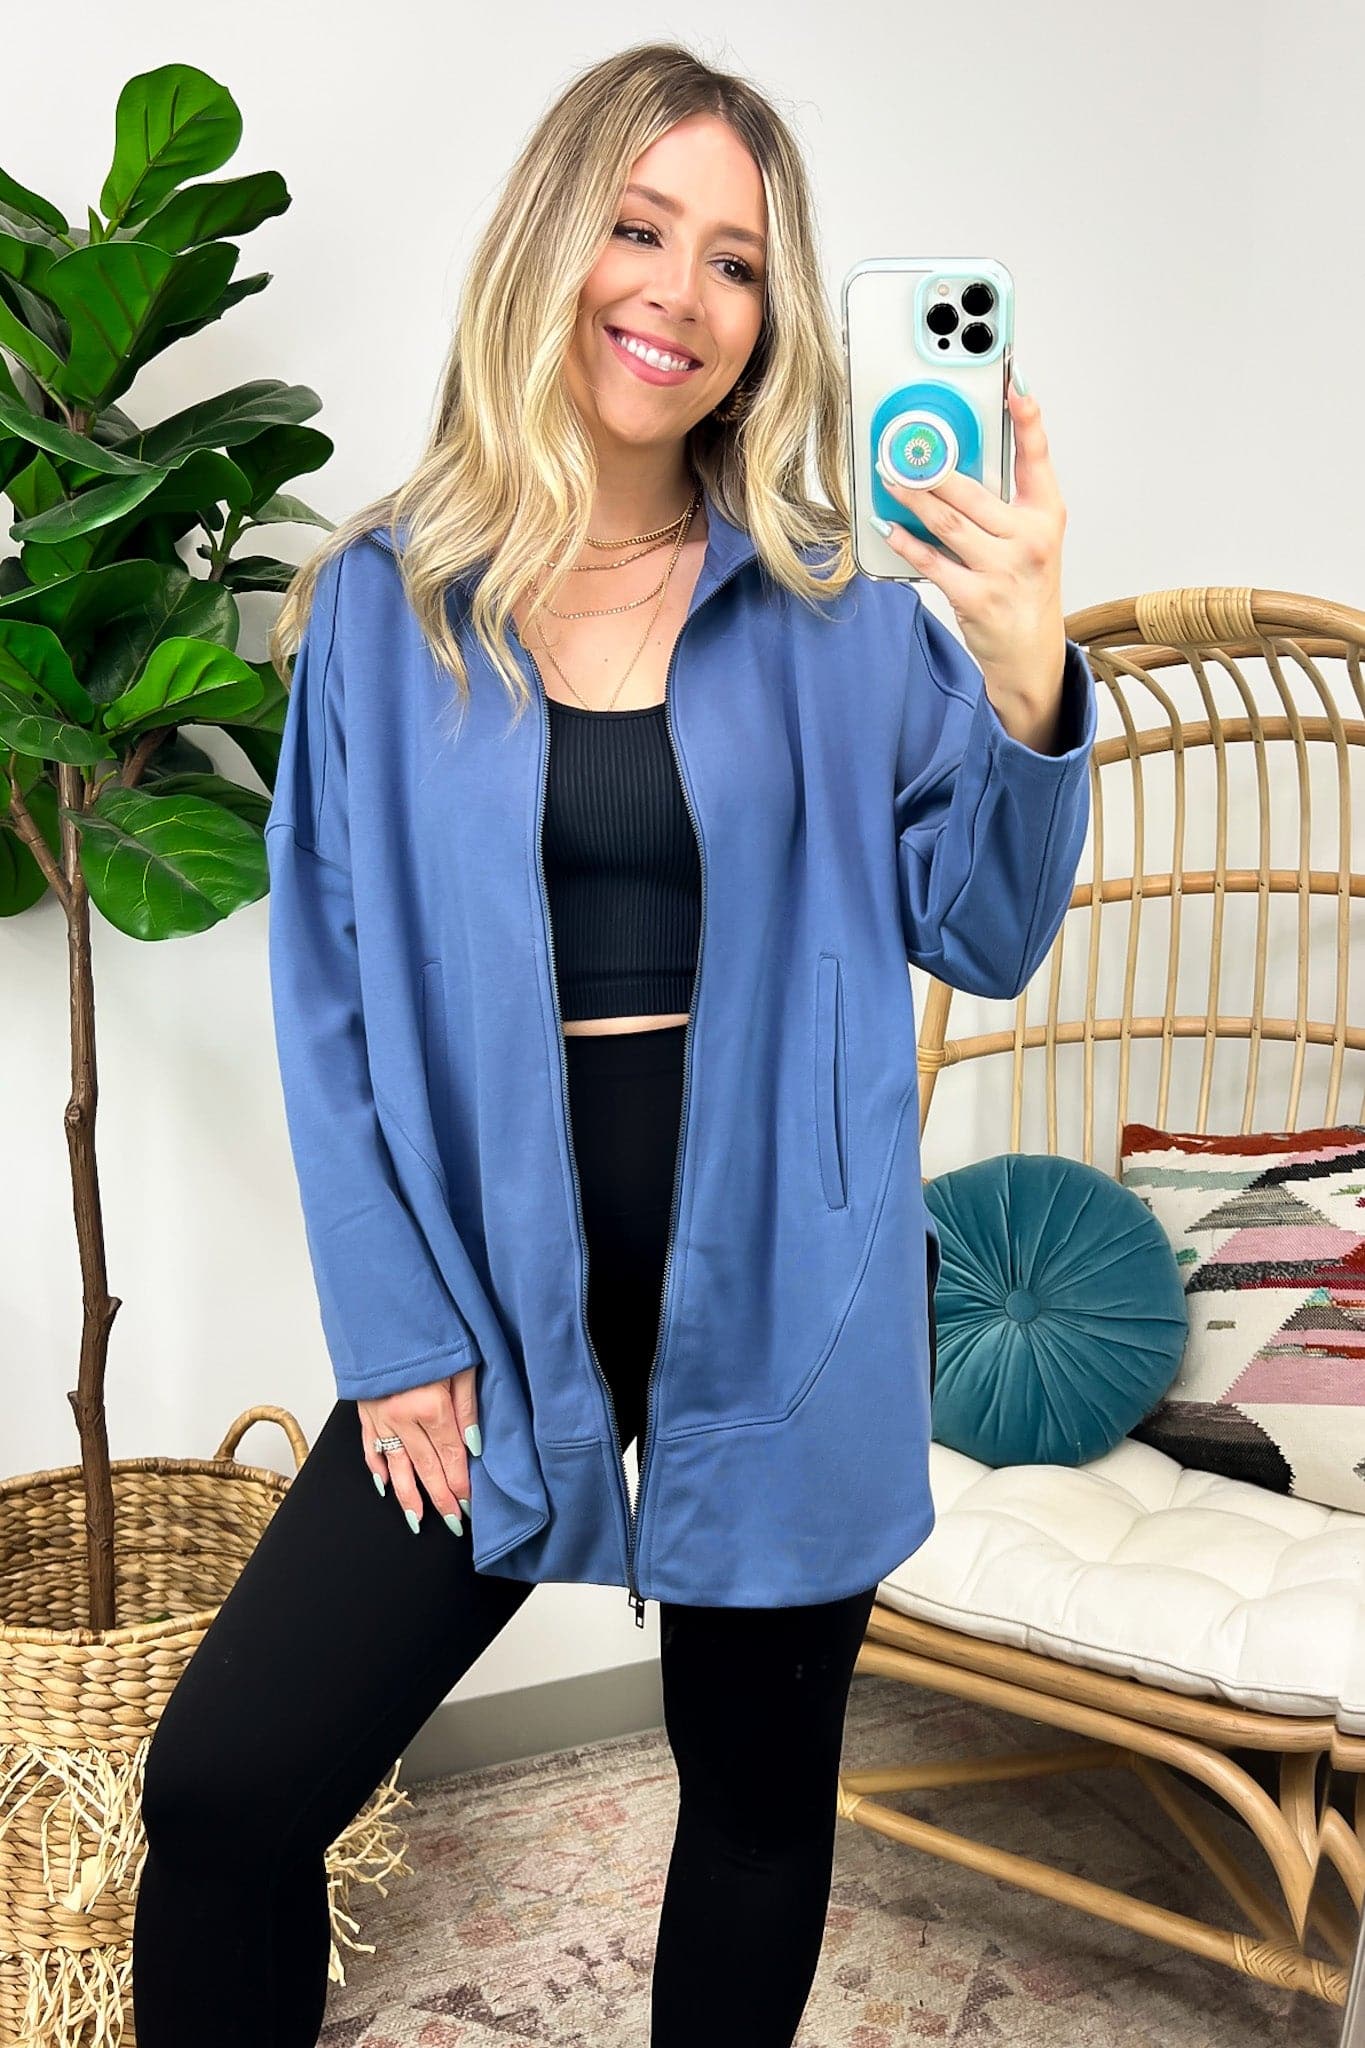  Adriel Slouchy Oversized Silhouette Jacket - FINAL SALE - Madison and Mallory